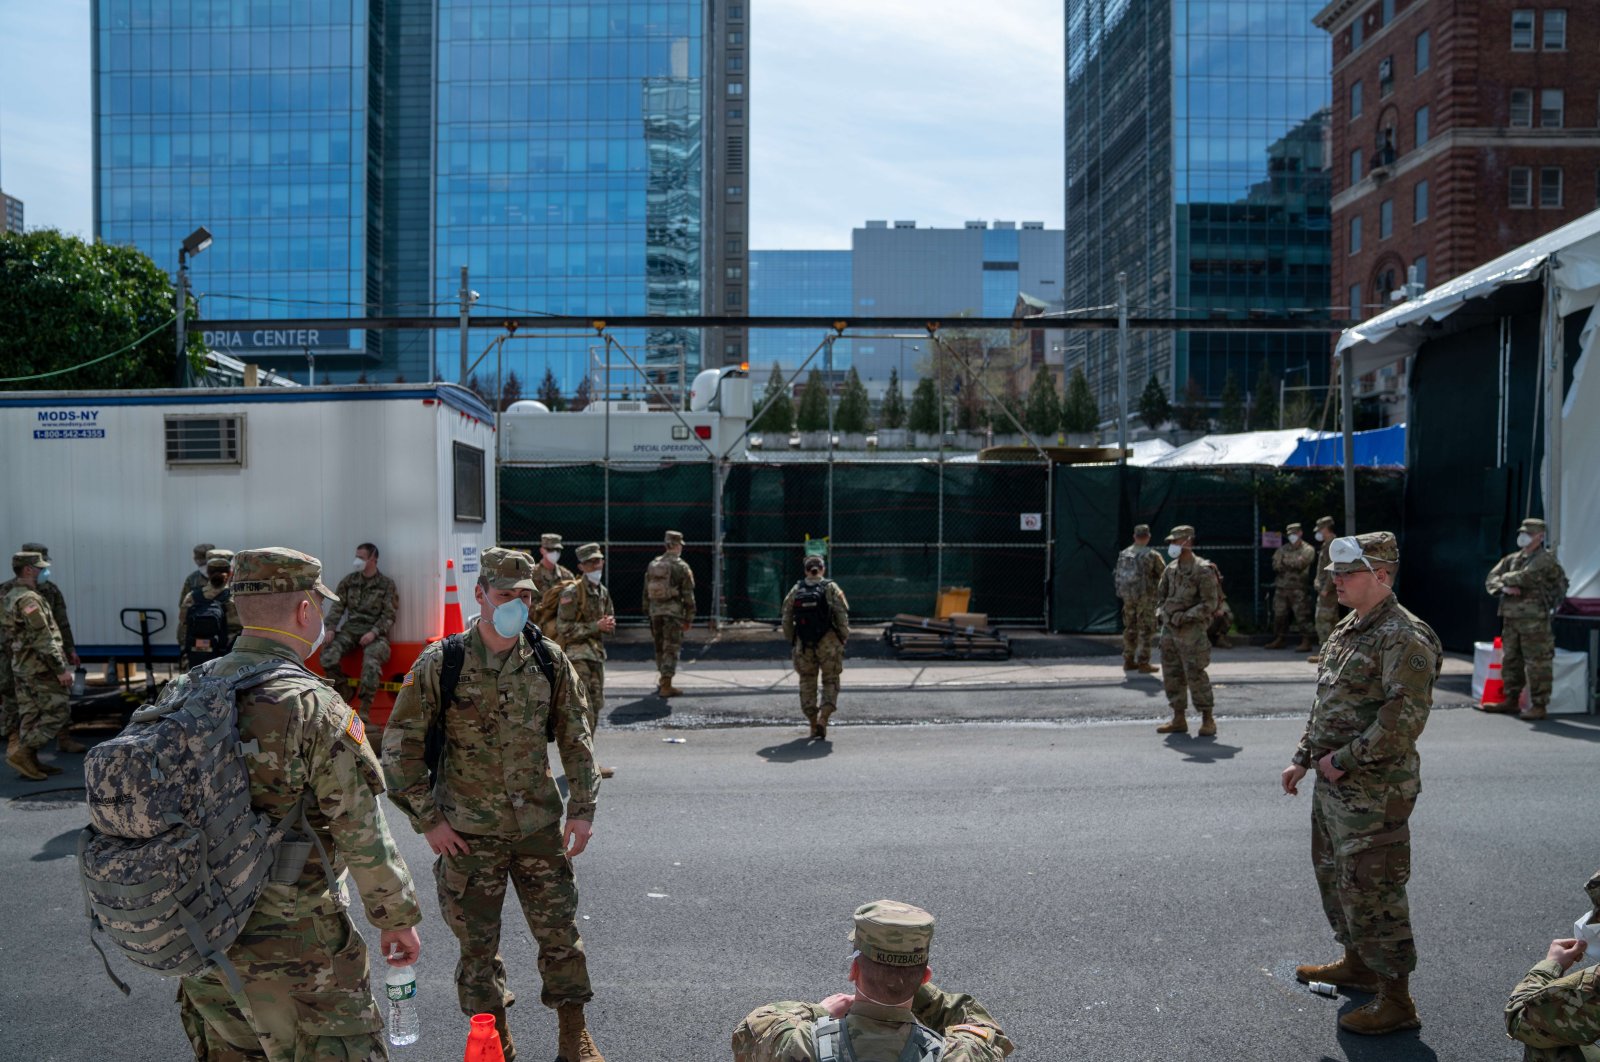 A group of soldiers on a side street behind the medical examiners office, New York, April 7, 2020. (AFP Photo)